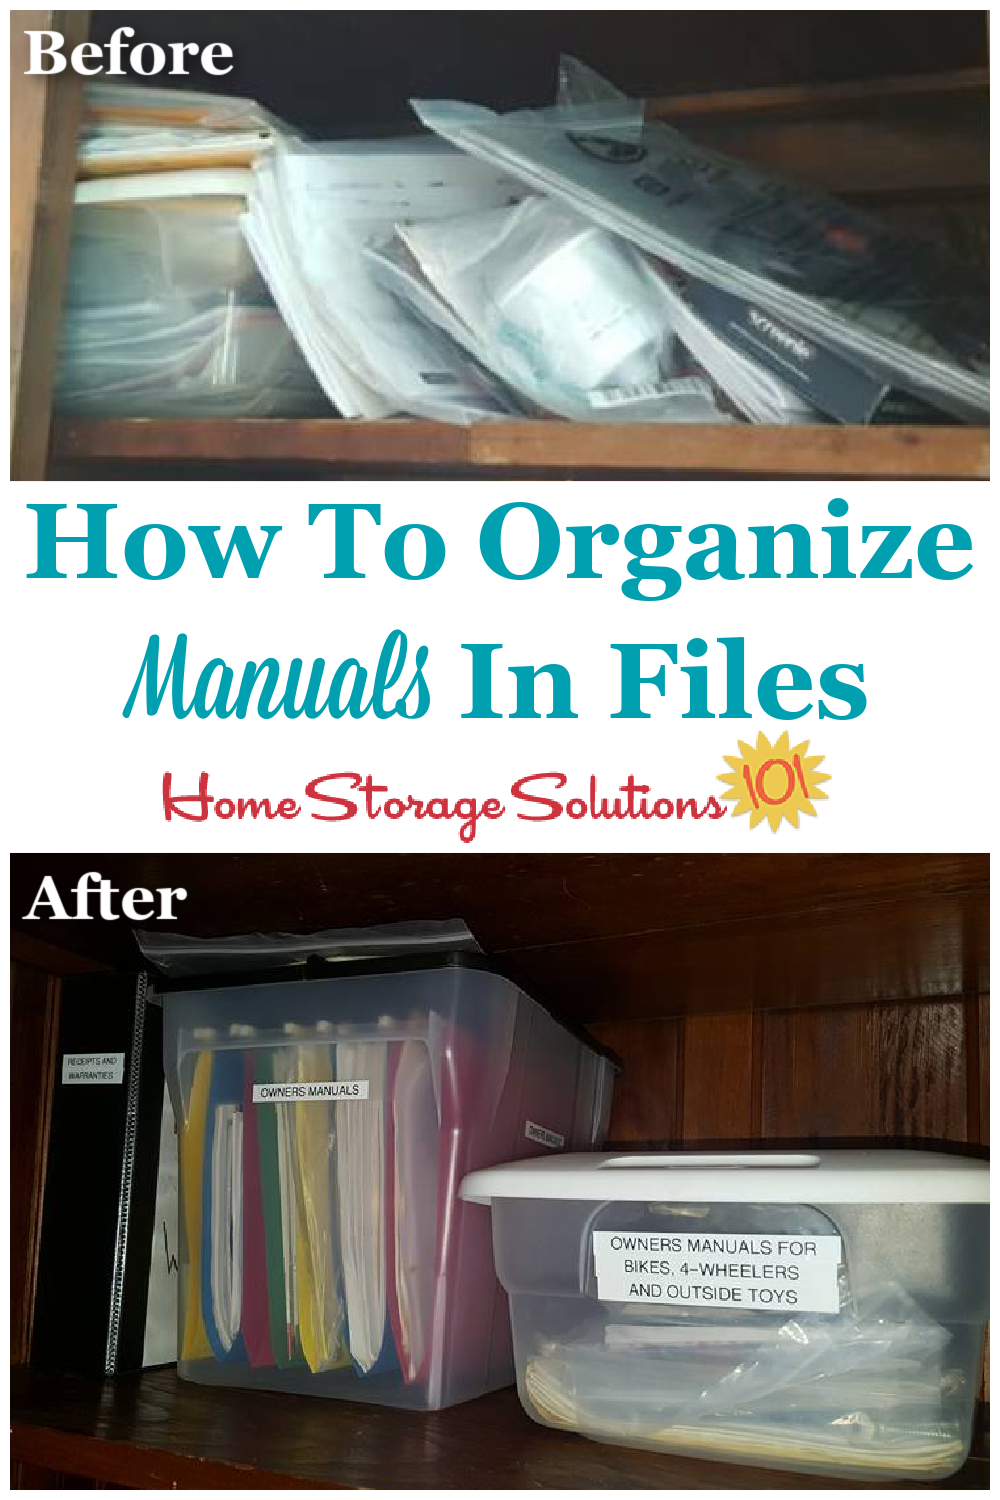 How to organize owner's manuals in files {on Home Storage Solutions 101}